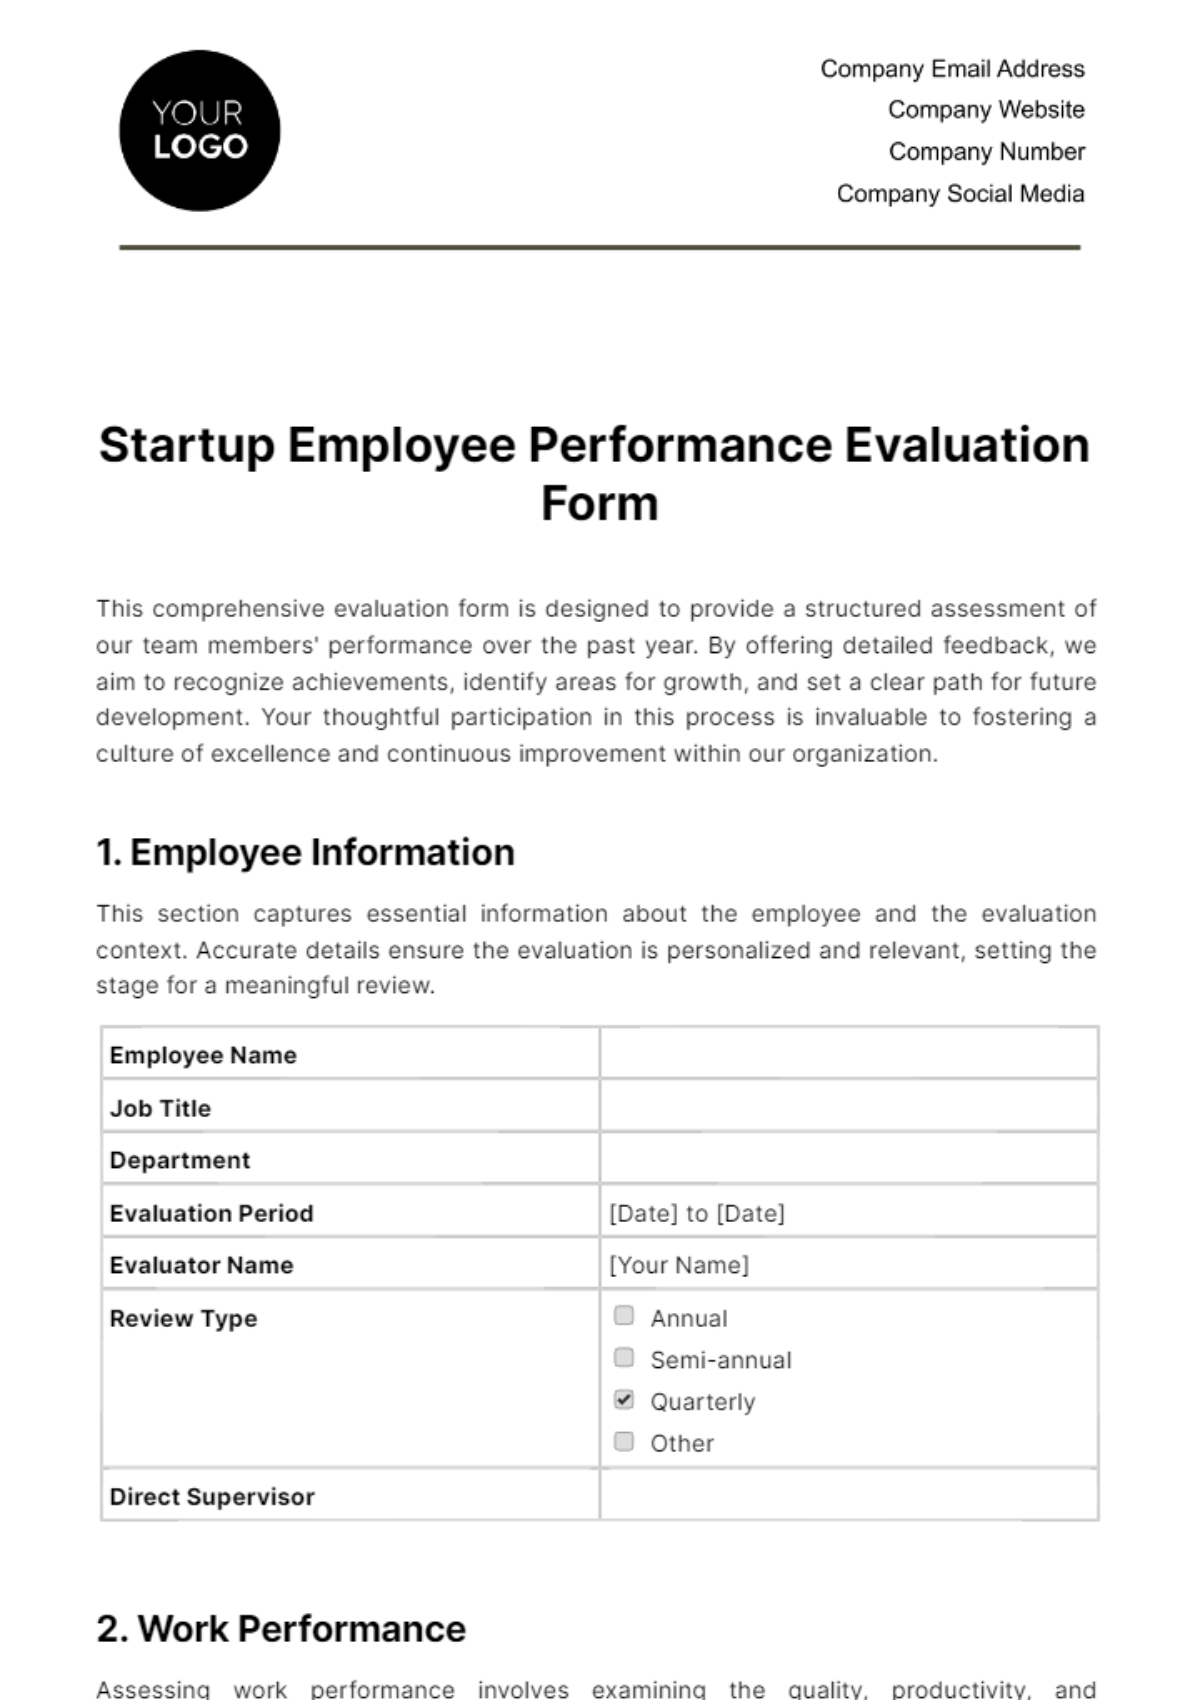 Free Startup Employee Performance Evaluation Form Template